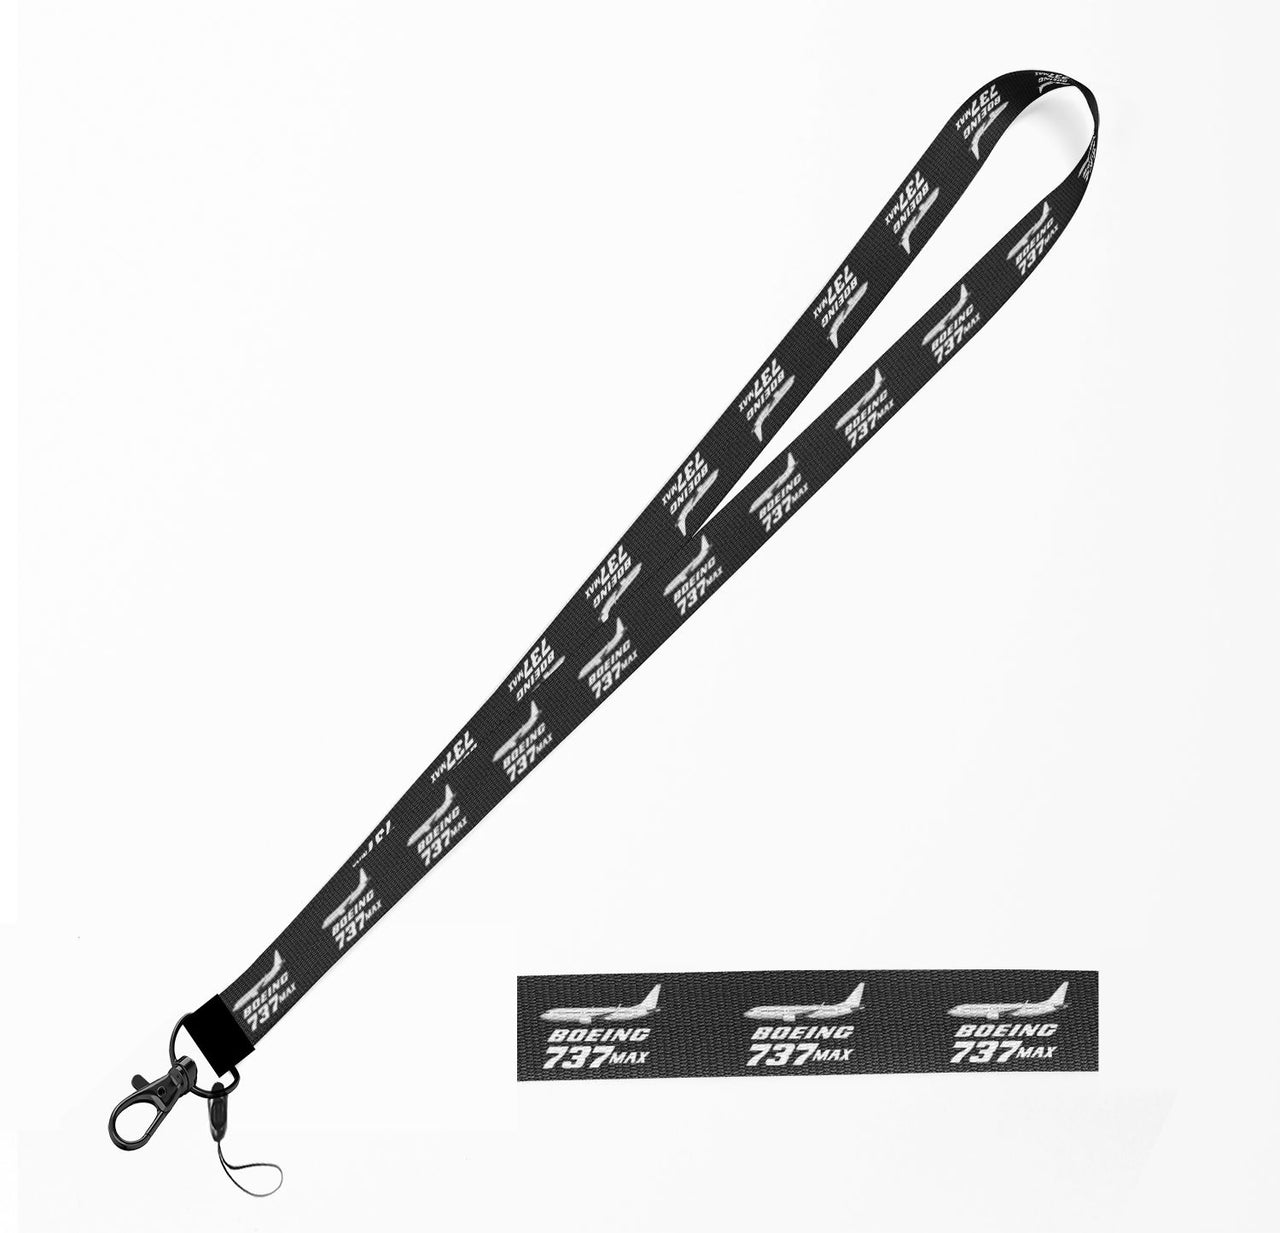 The Boeing 737Max Designed Lanyard & ID Holders